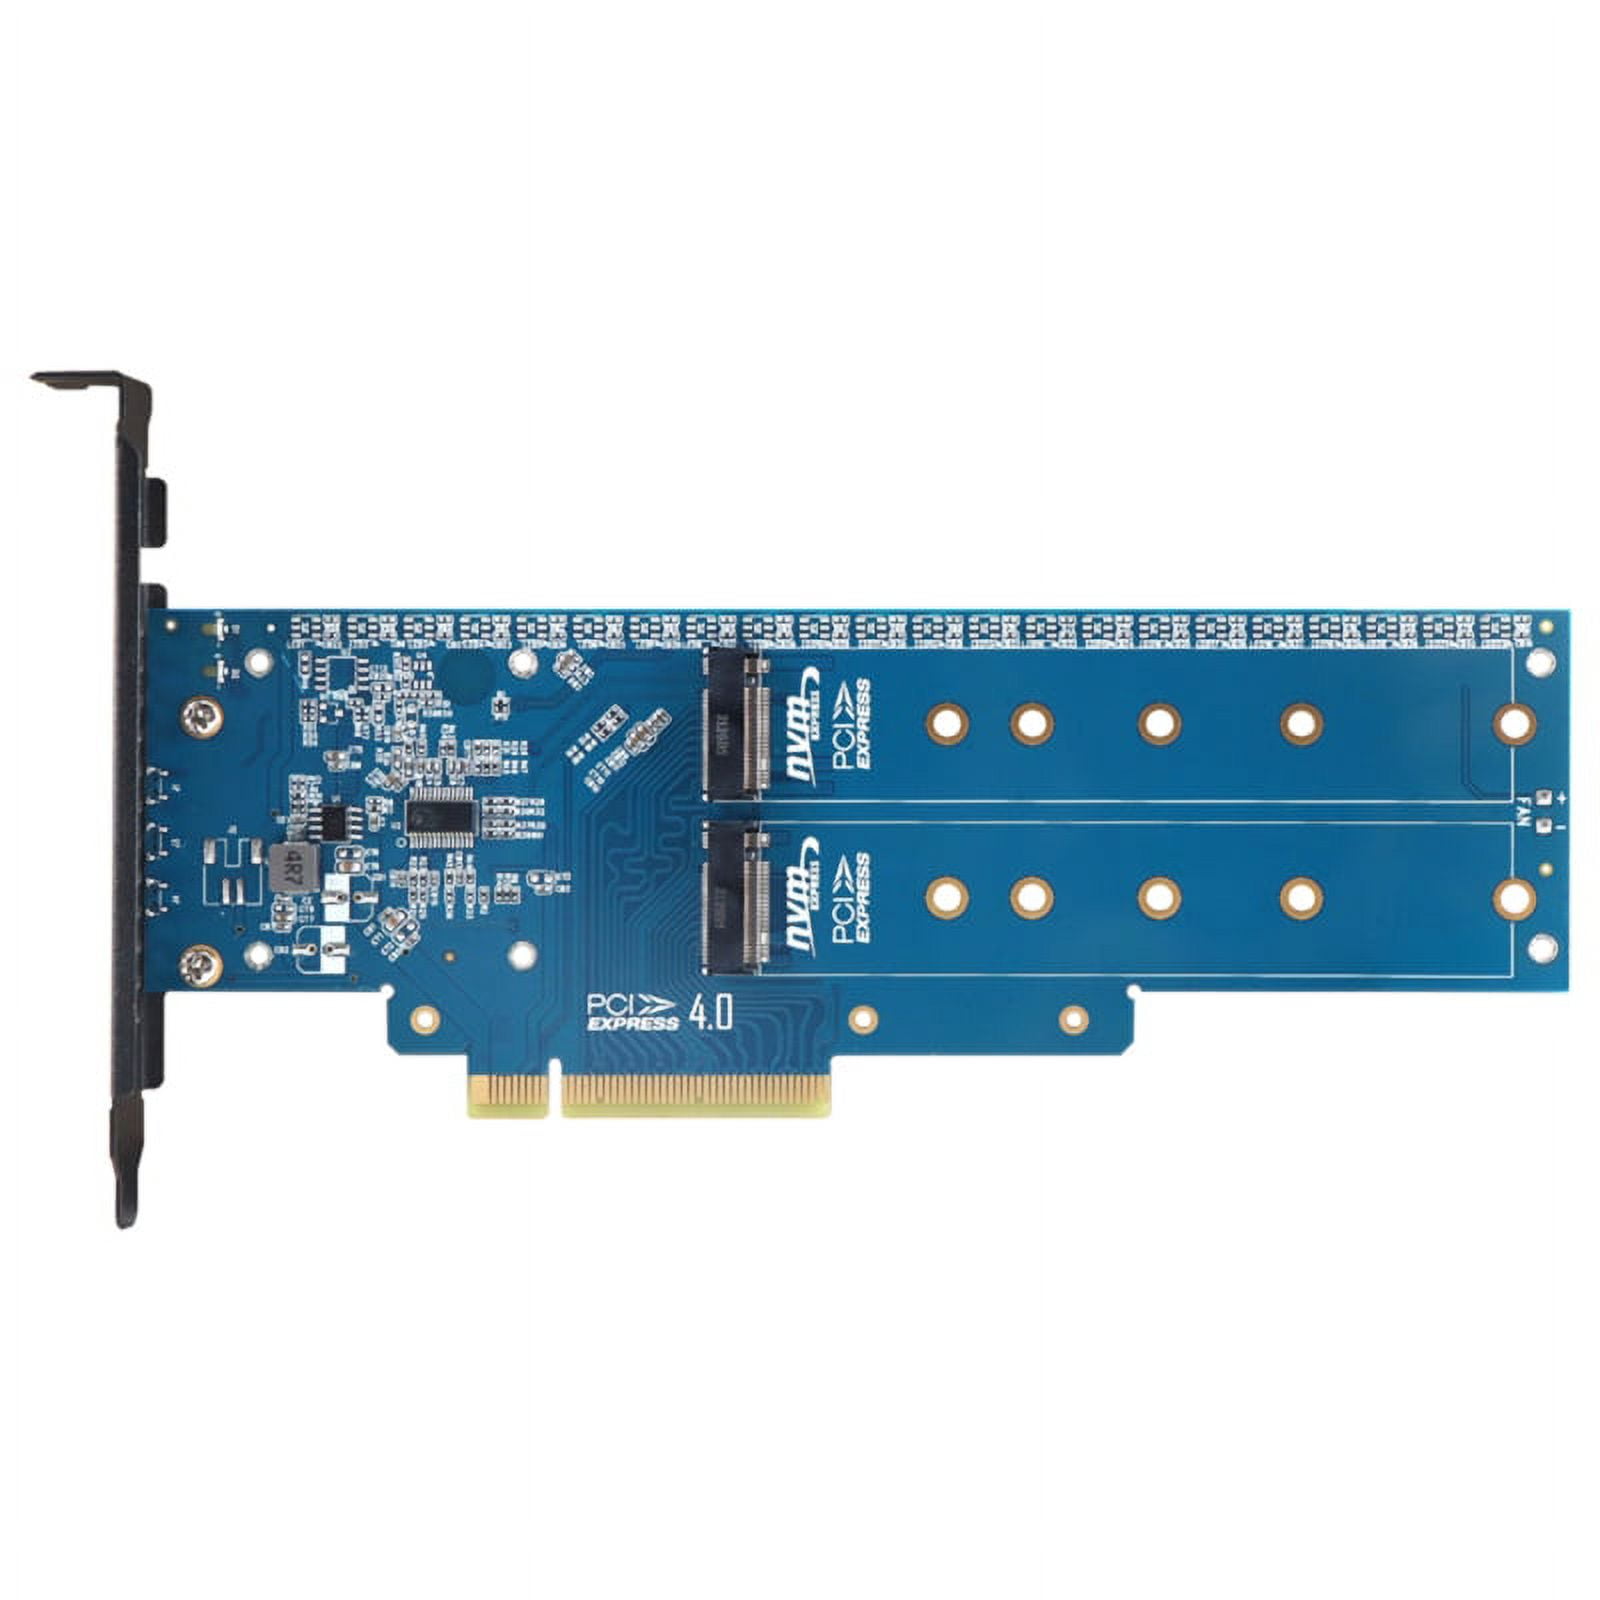 fanxiang S770 SSD 2To PCIe 4.0 NVMe SSD M.2 2280 Disque SSD